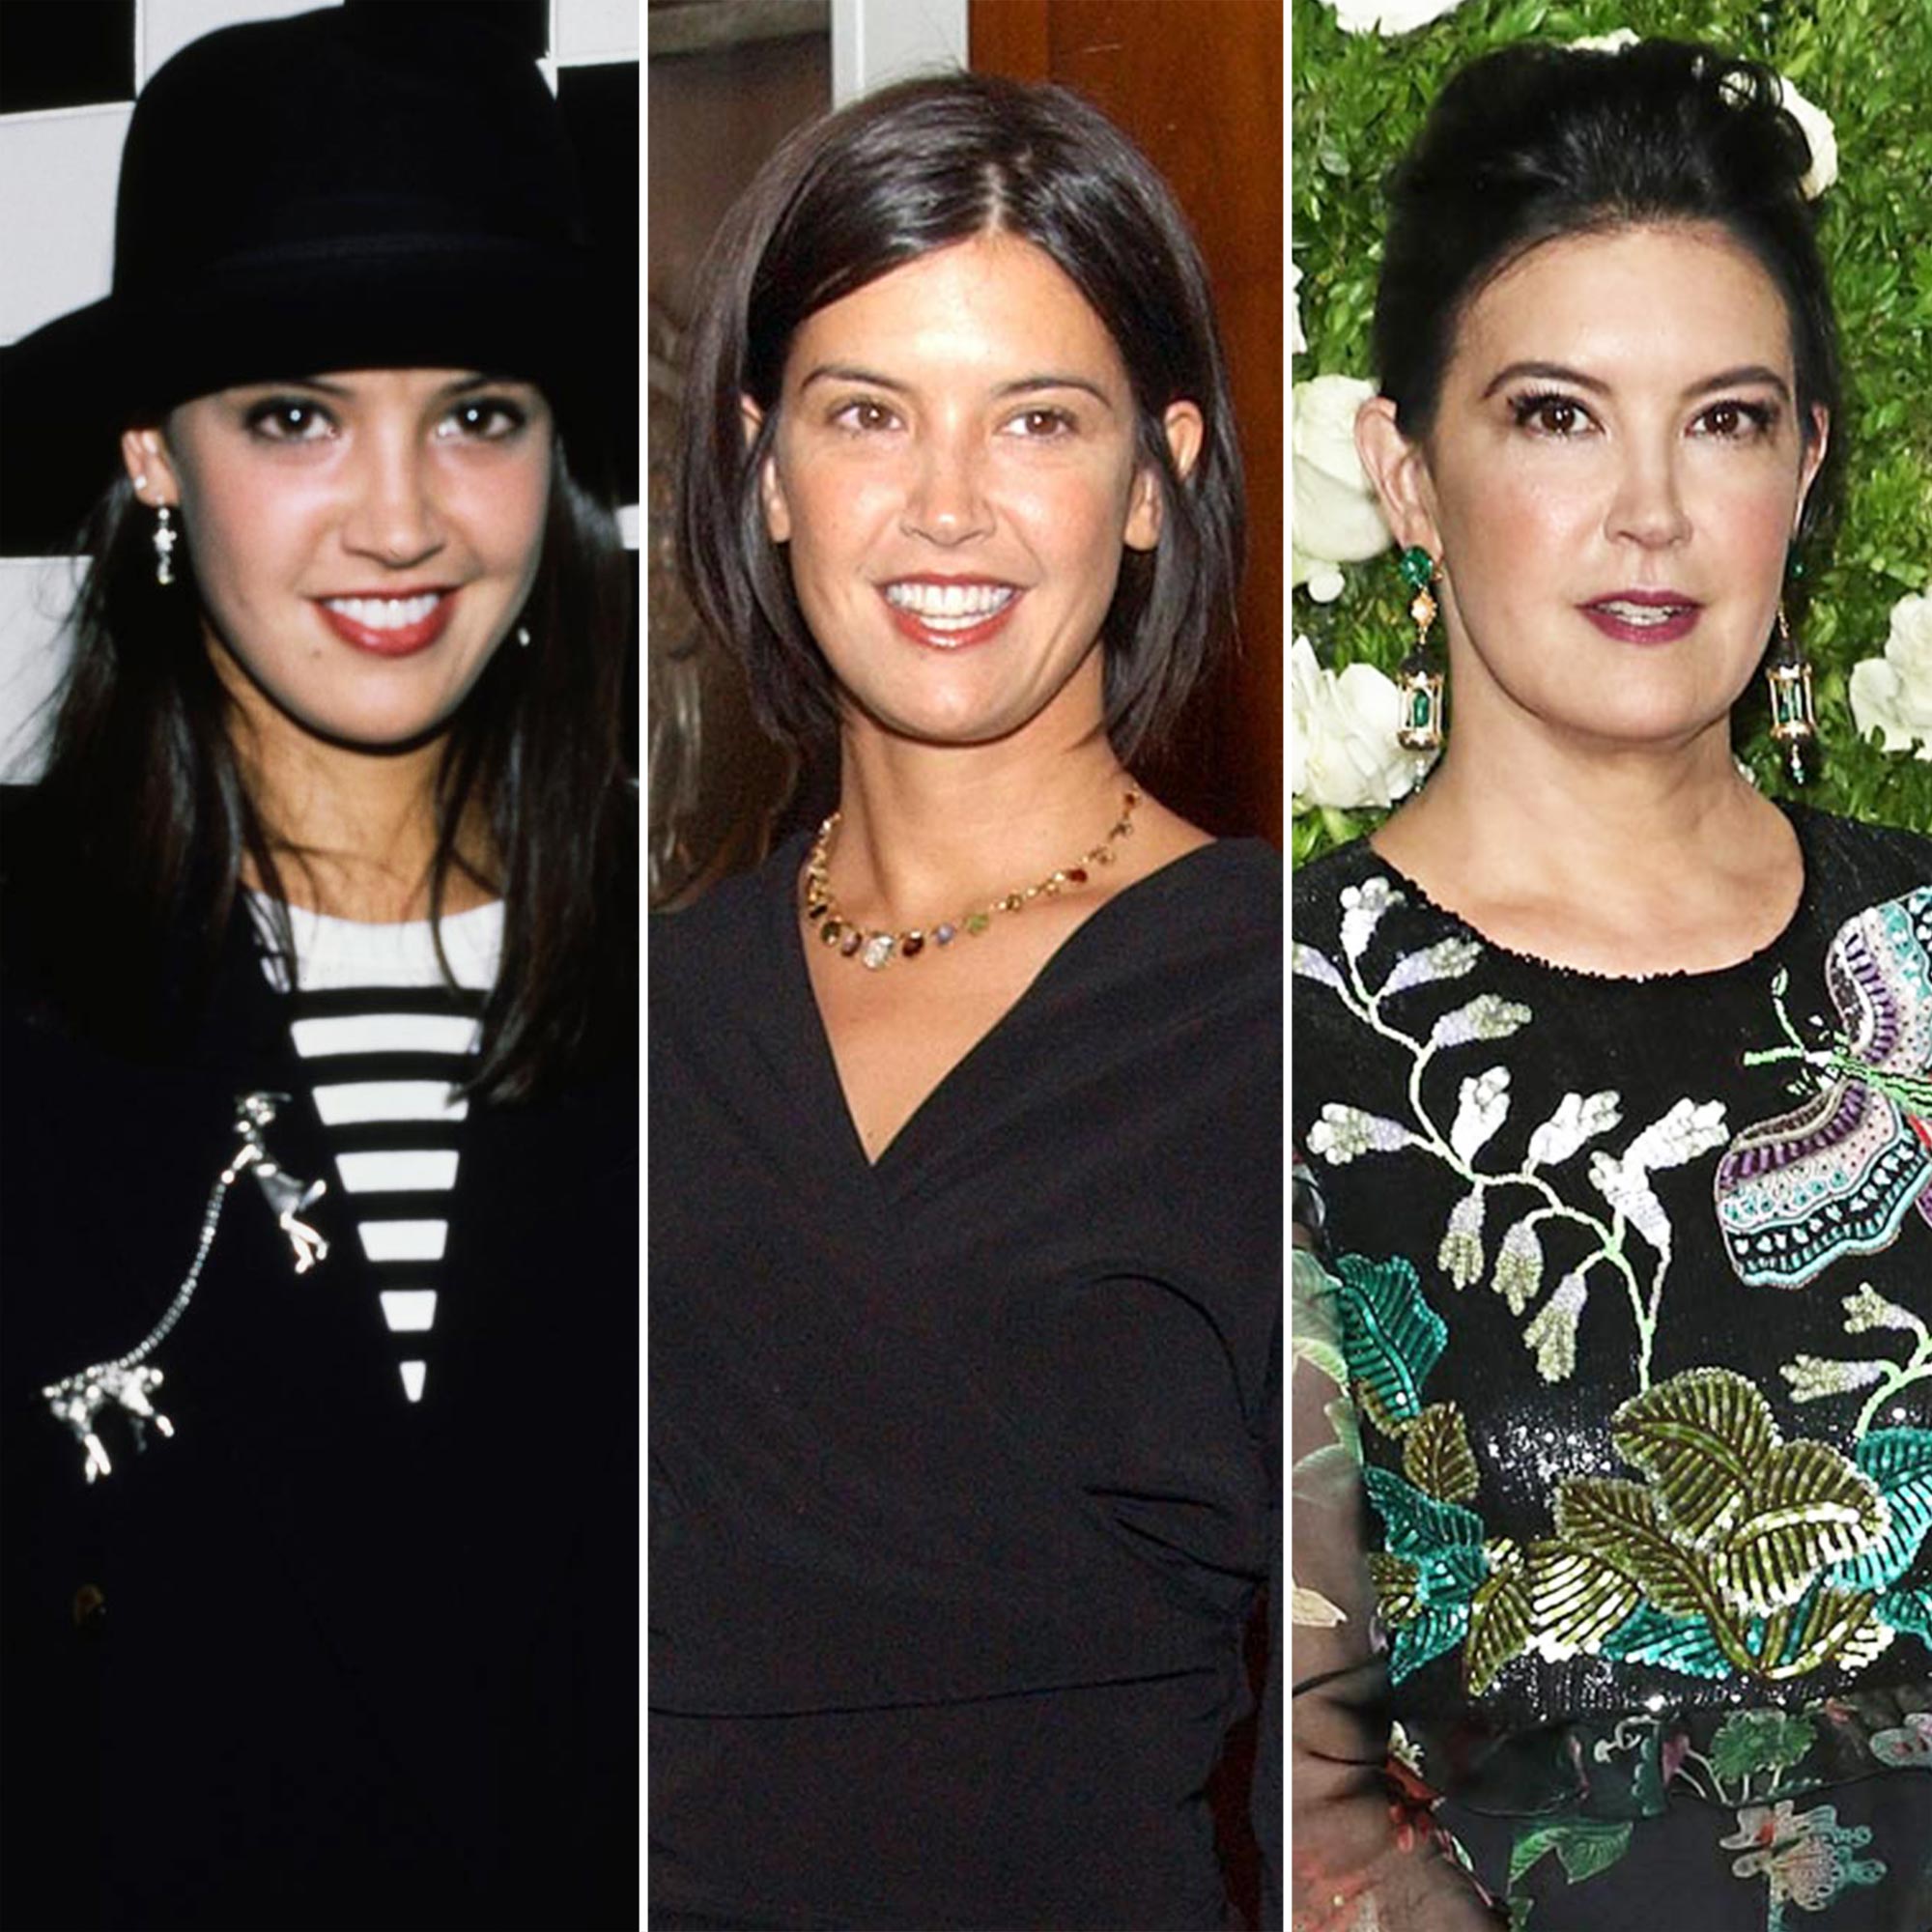 Phoebe Cates’ Transformation Photos From Then and Now: See What the ’80s Teen Idol Looks Like Today